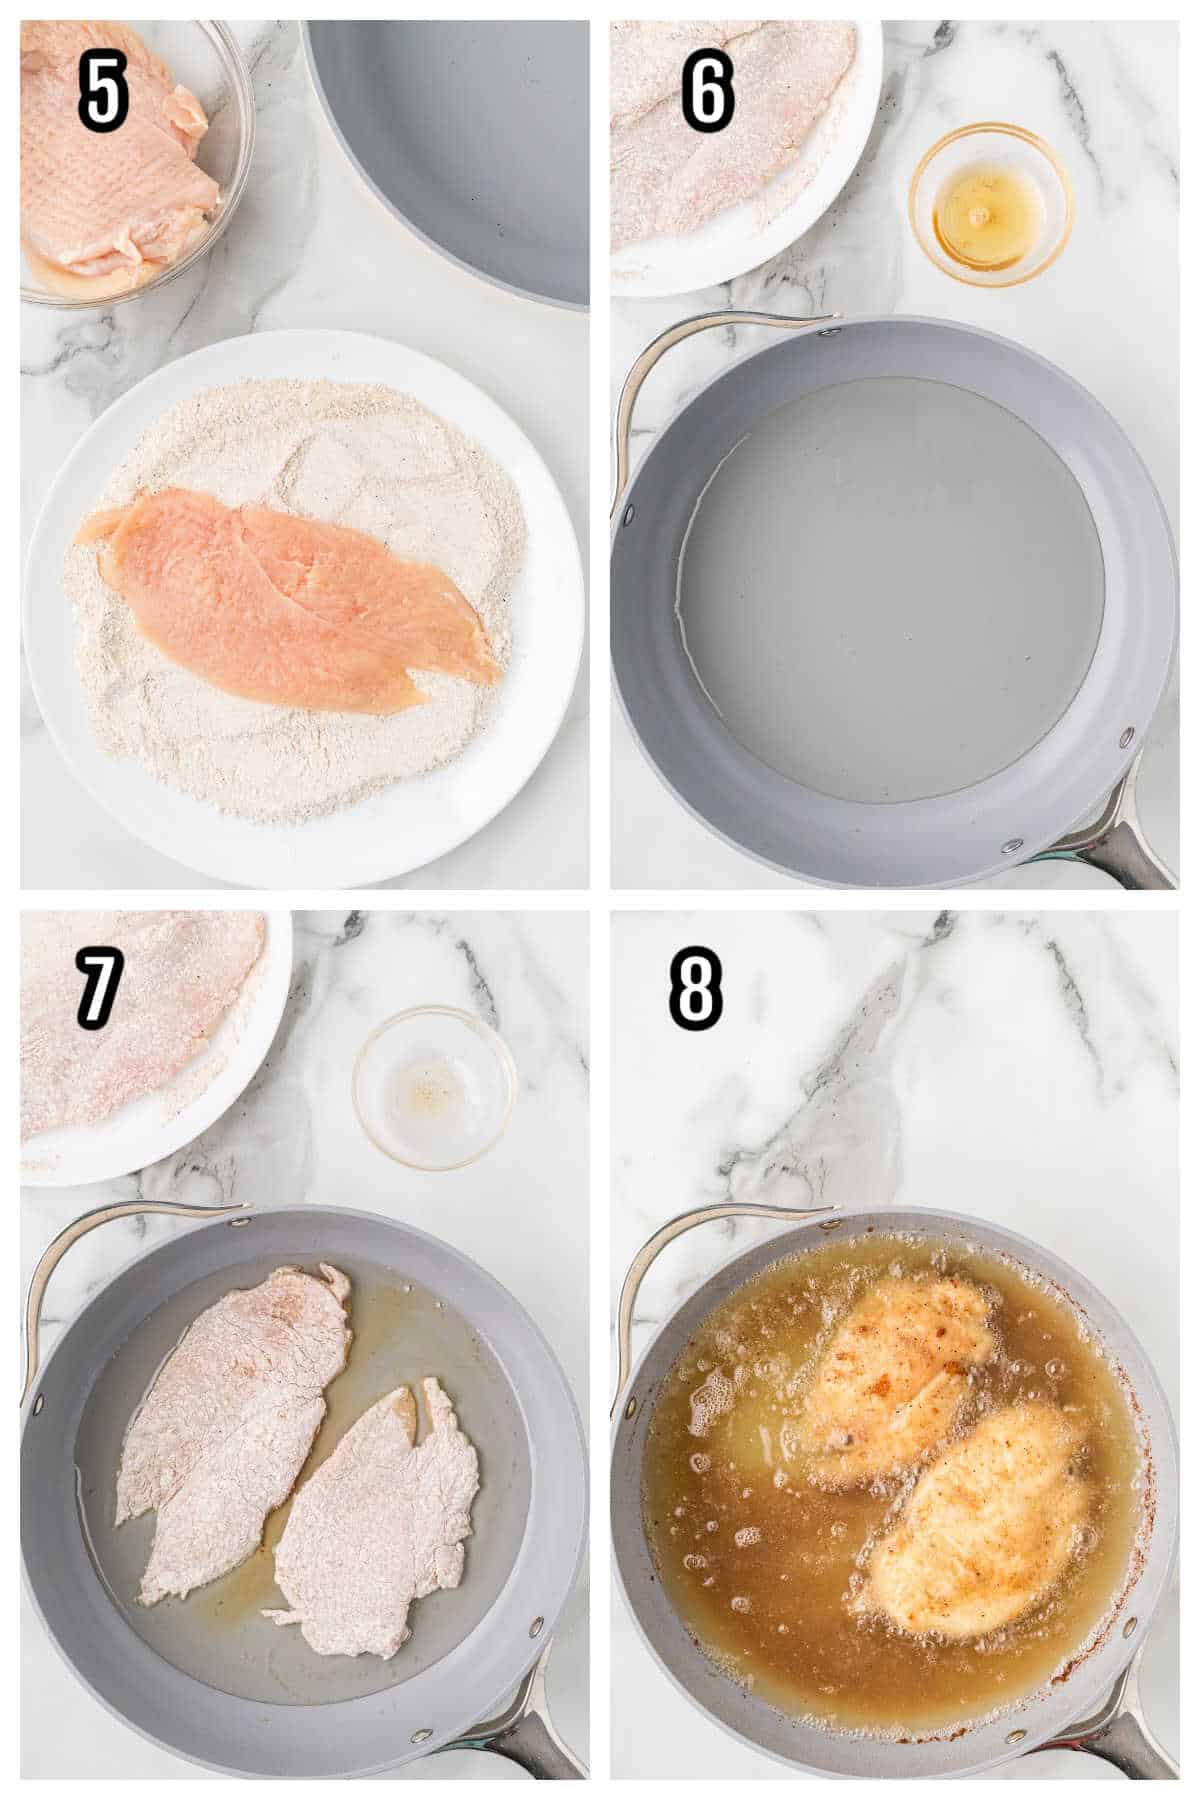 The second collage will include steps five through eight for the smothered chicken breast recipe. 